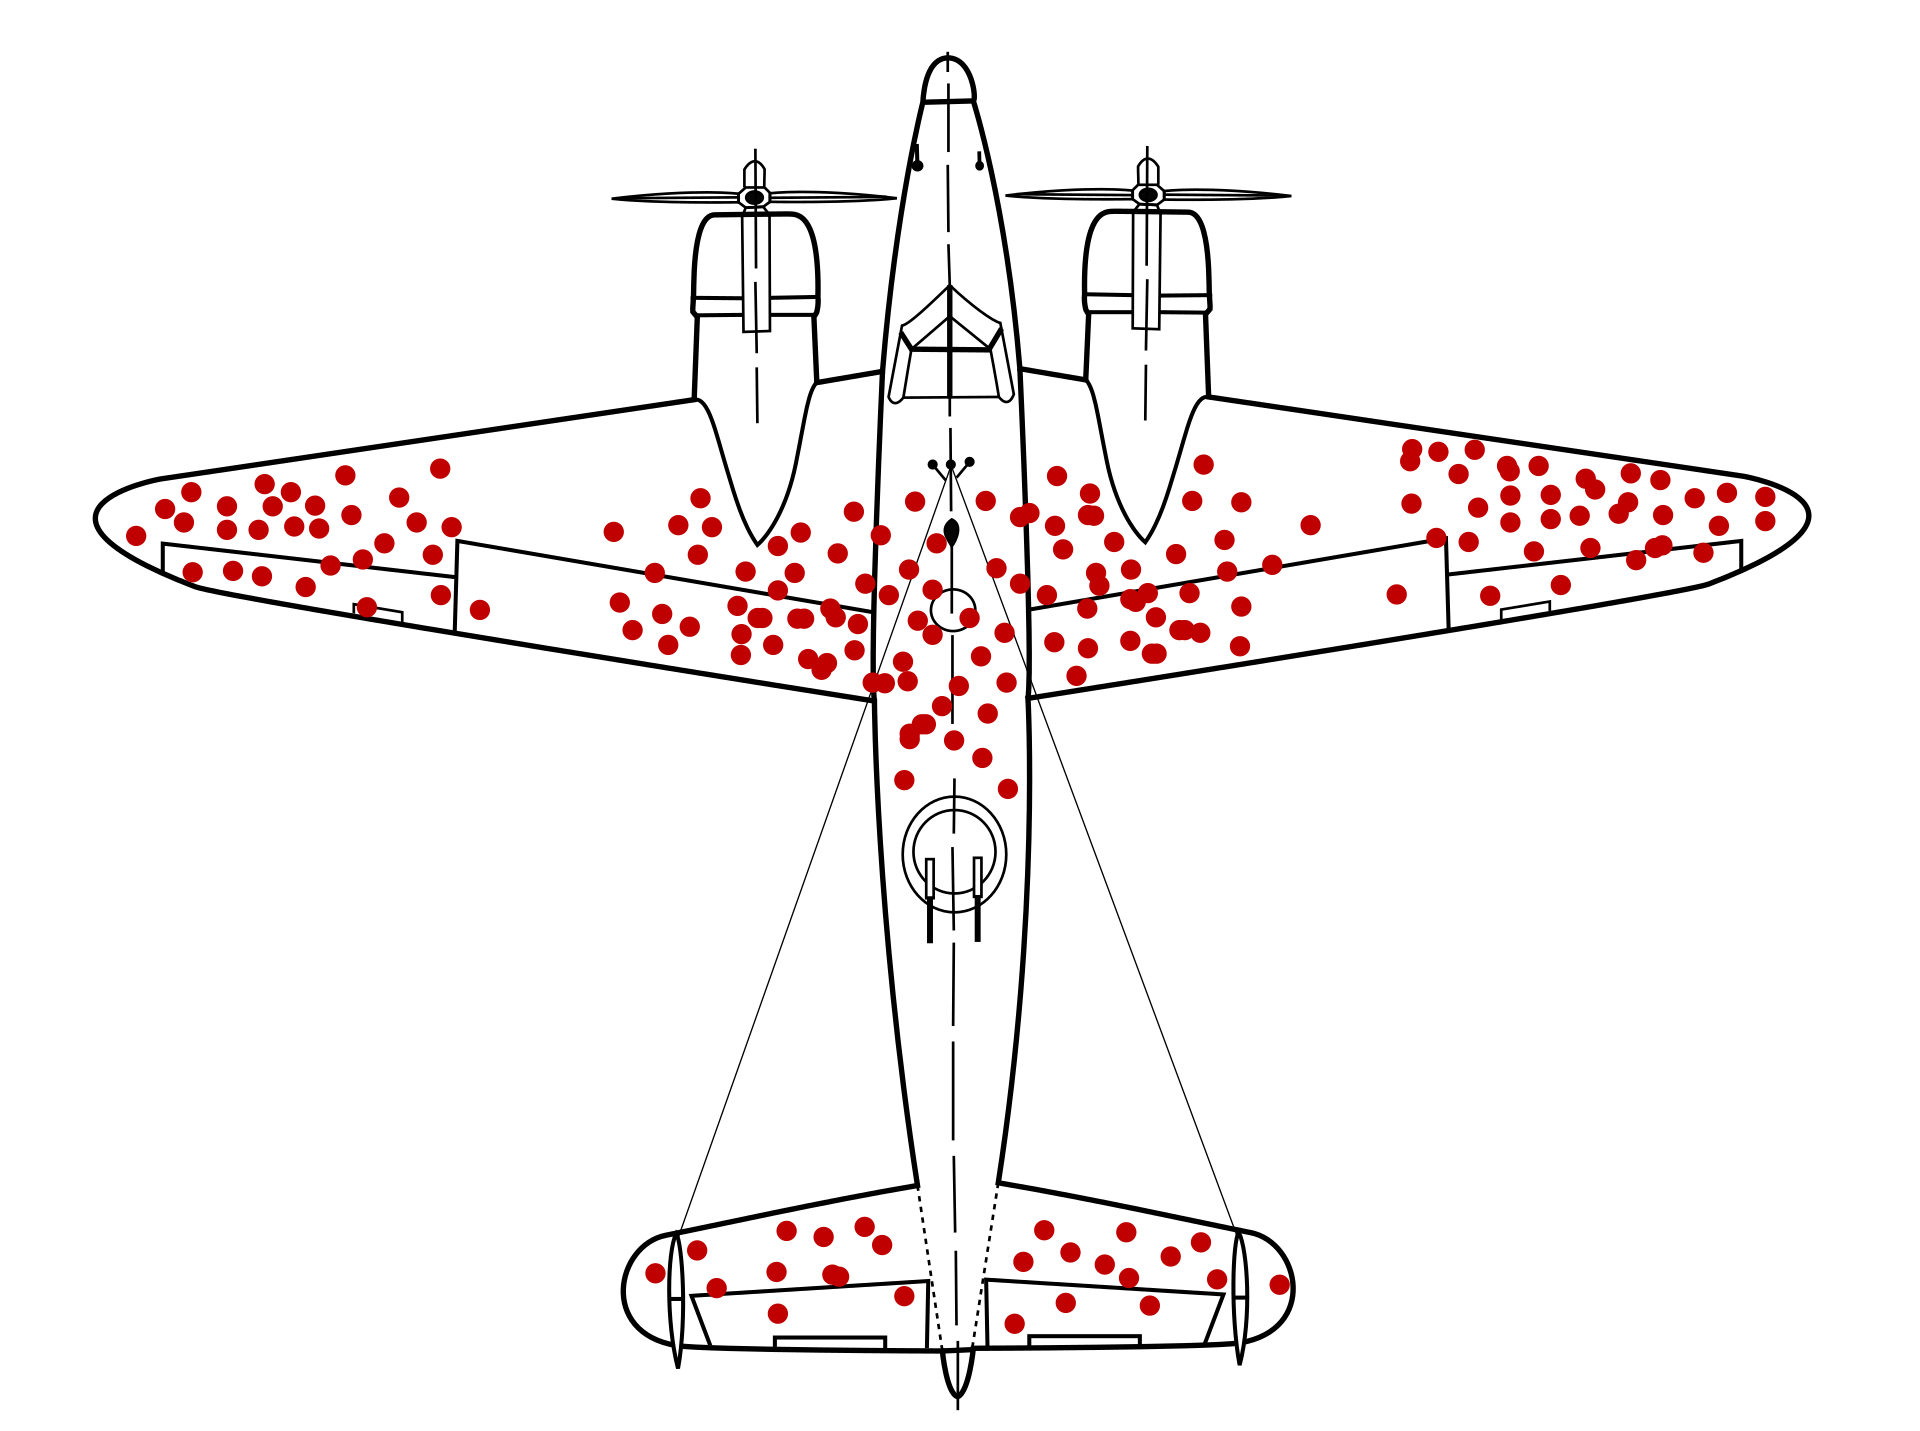 Diagram of a plane with red bullet holes